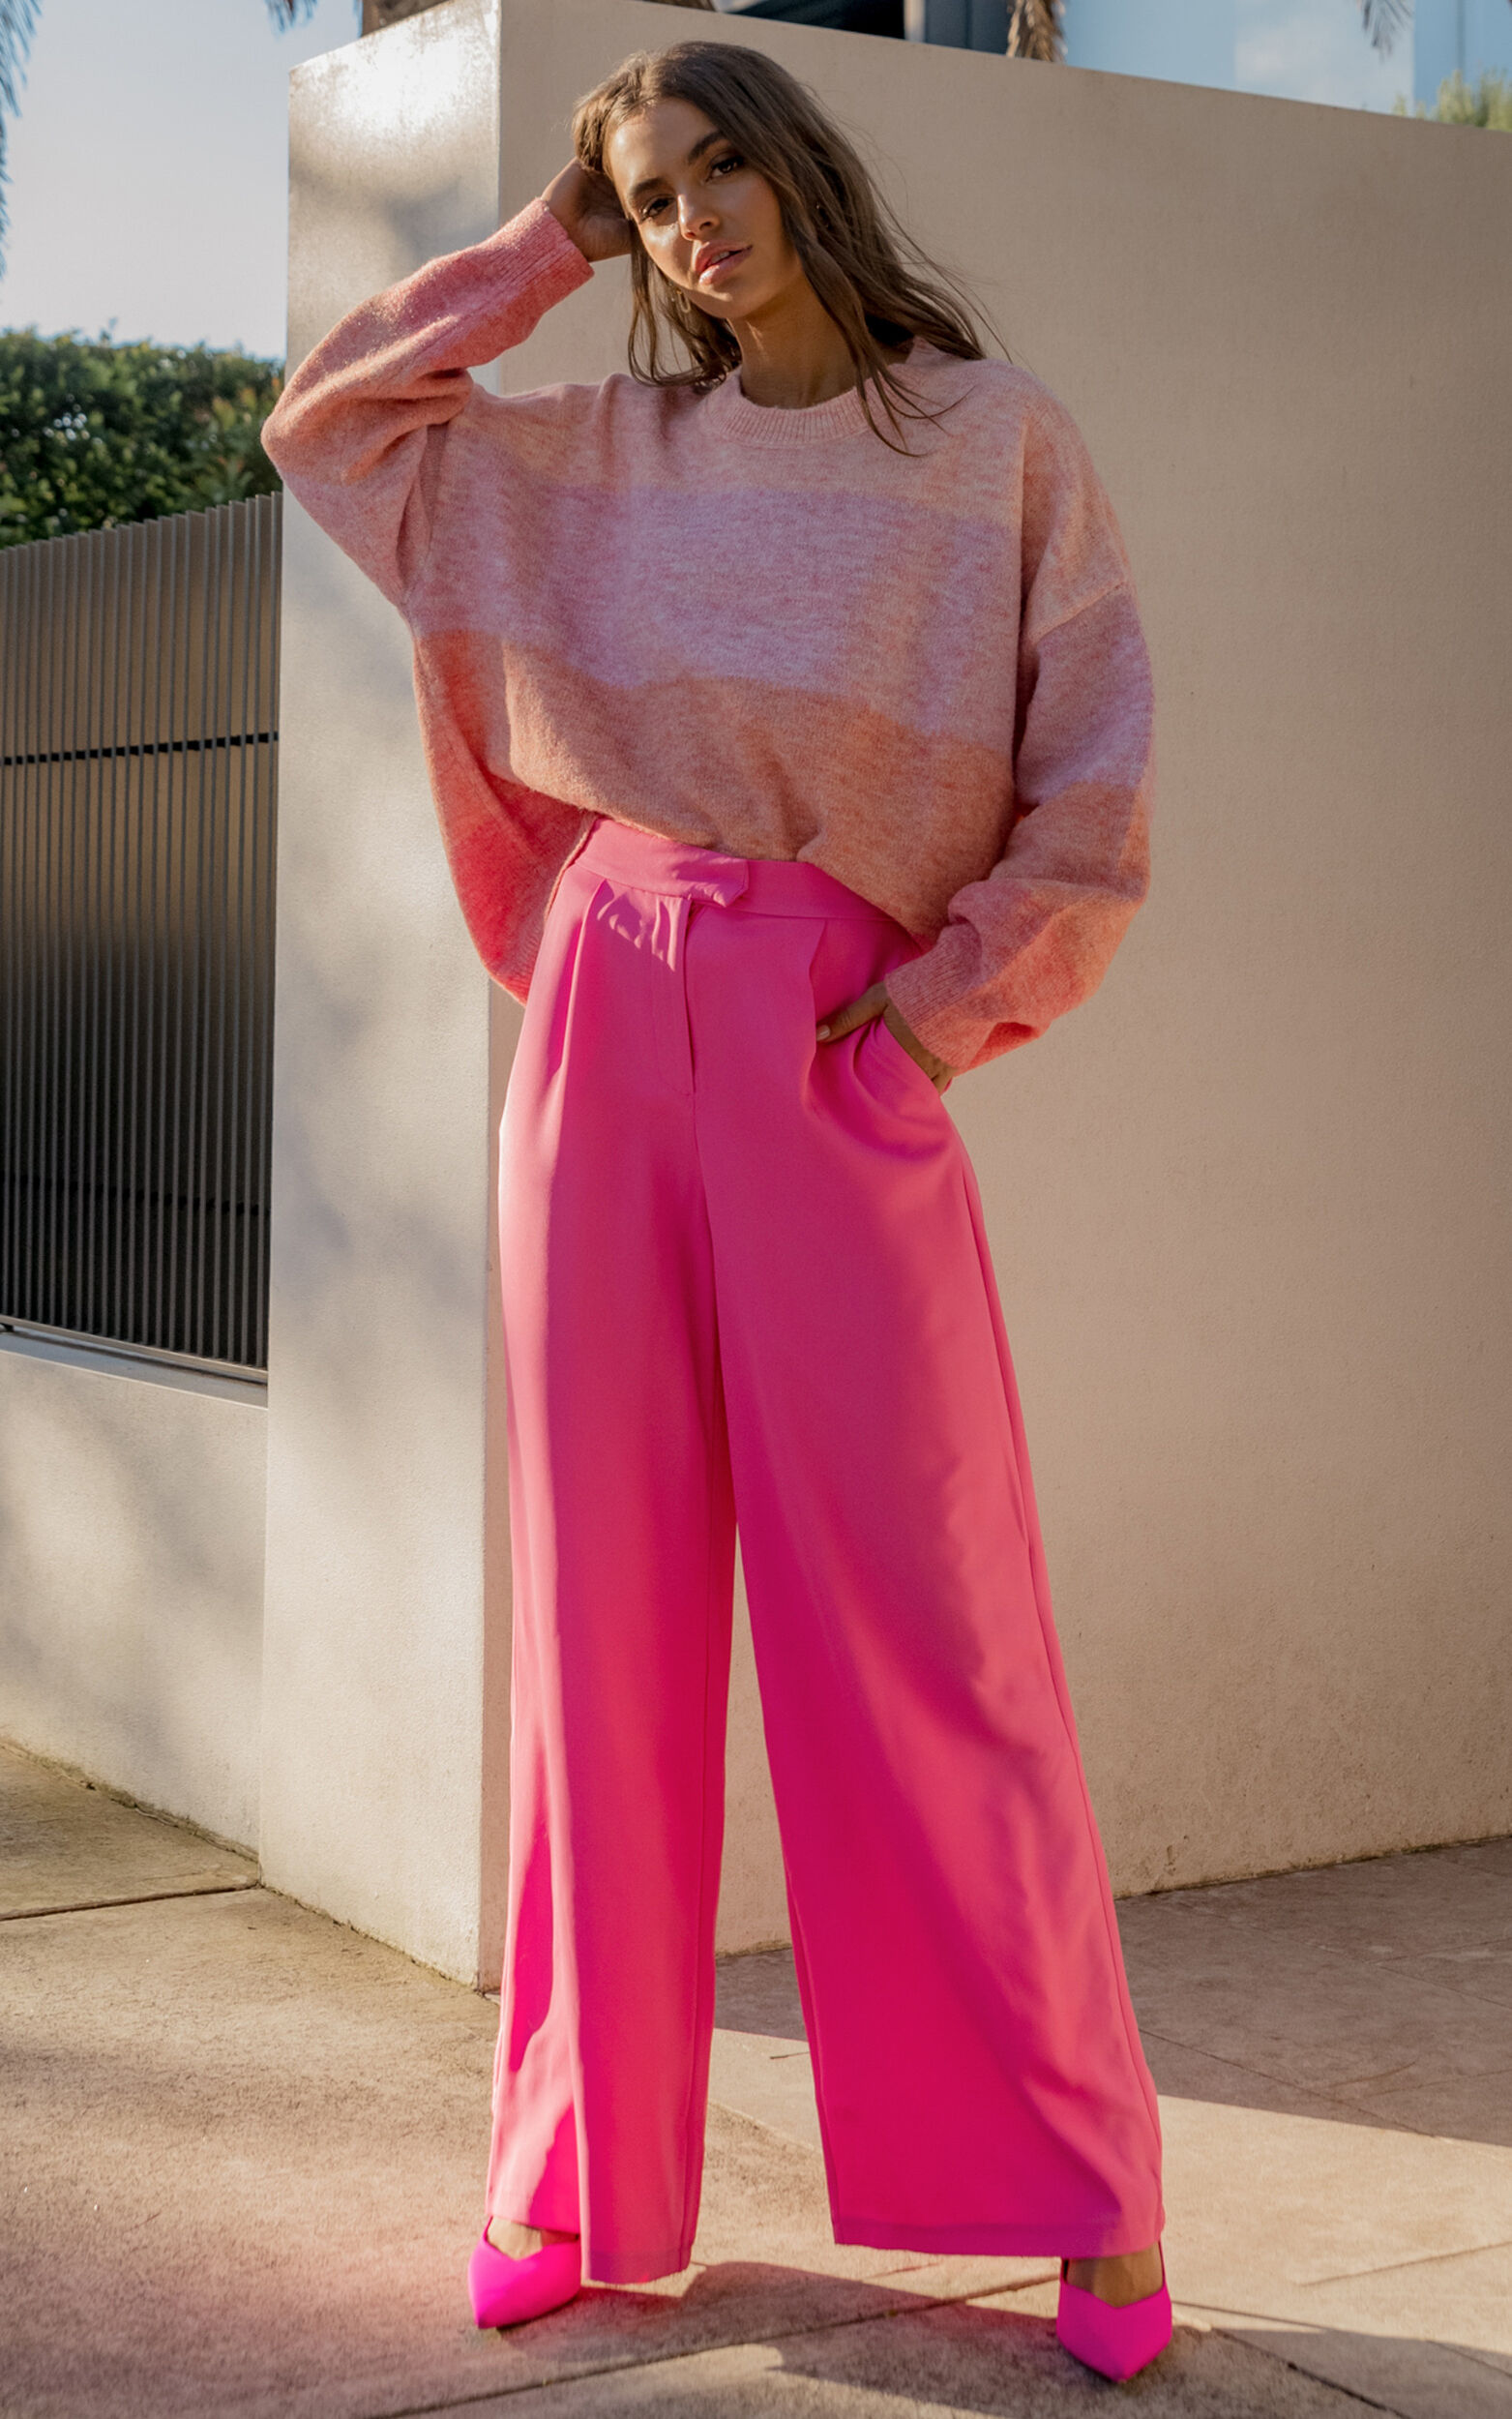 Caroline Pants - High Waisted Tailored Pants in Hot Pink - 06, PNK1